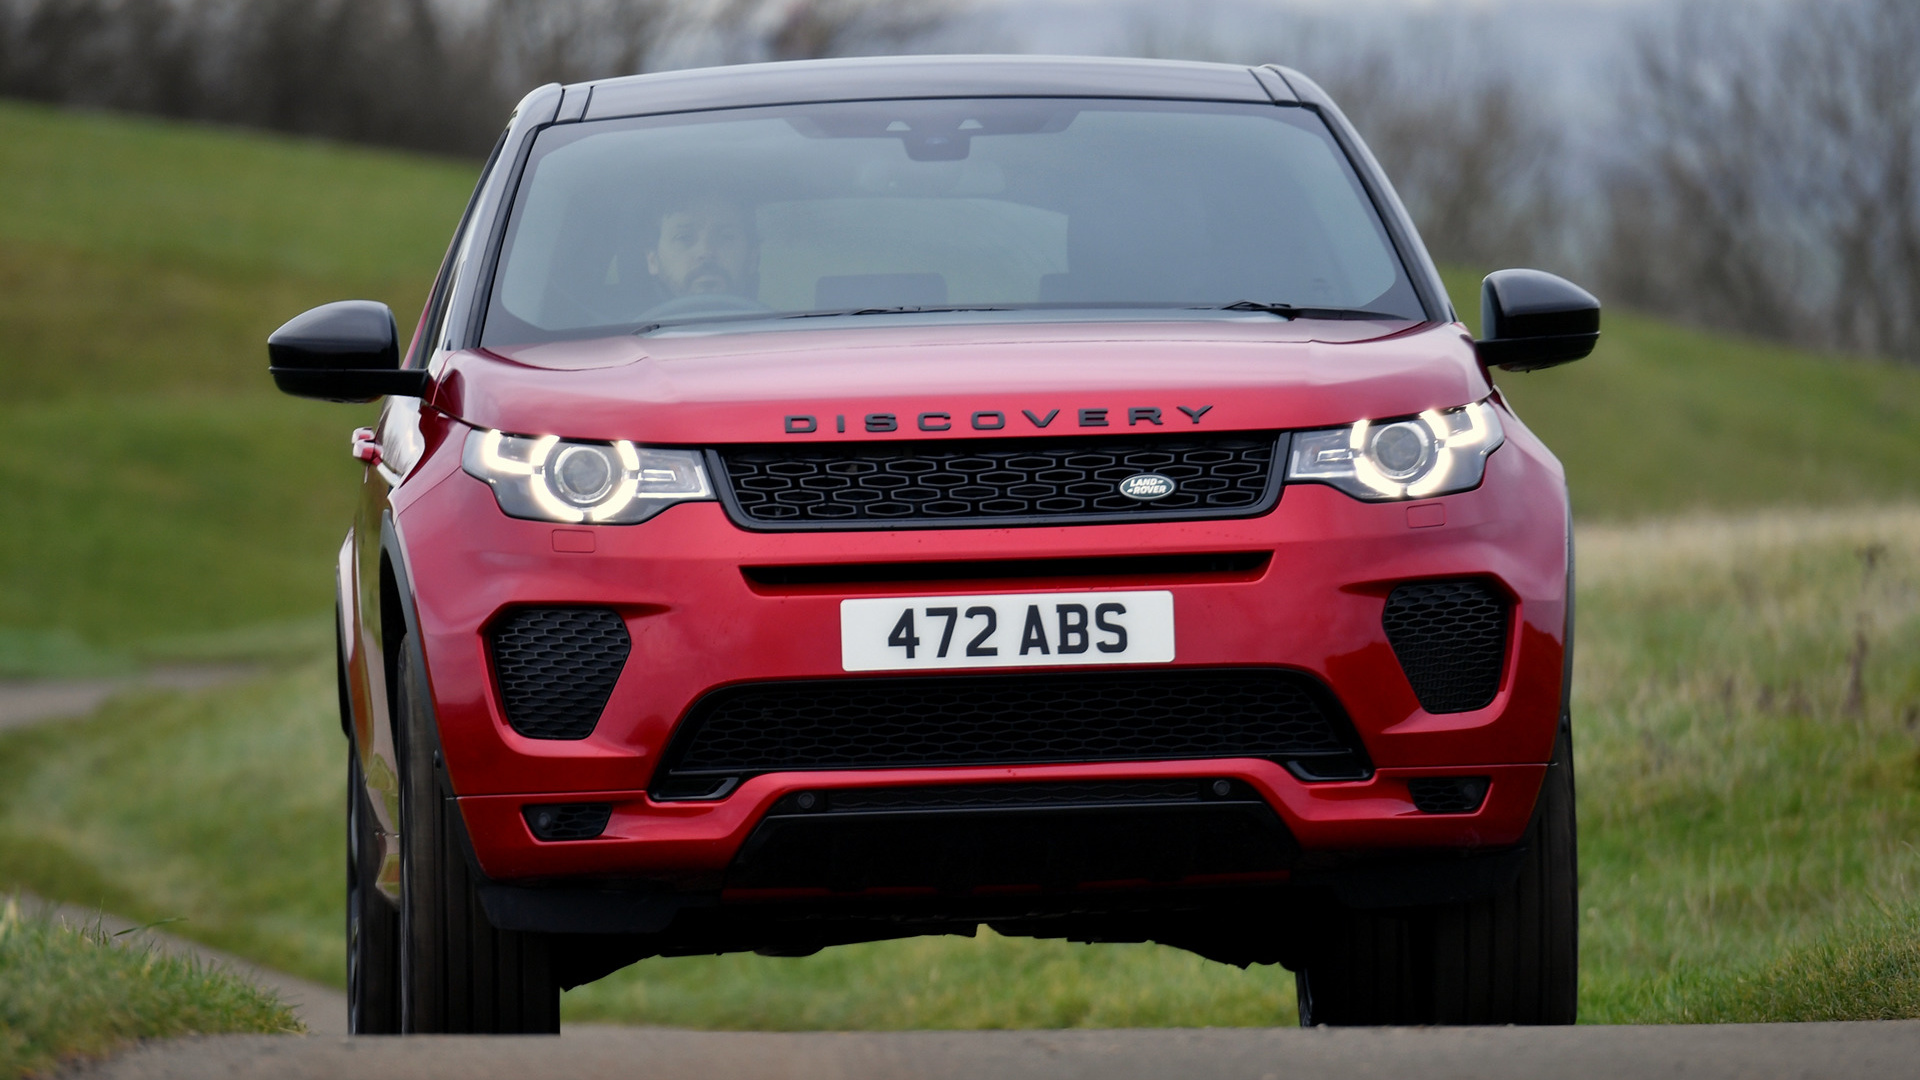 Car Crossover Car Land Rover Discovery Sport Dynamic Luxury Car Red Car Suv Subcompact Car 1920x1080